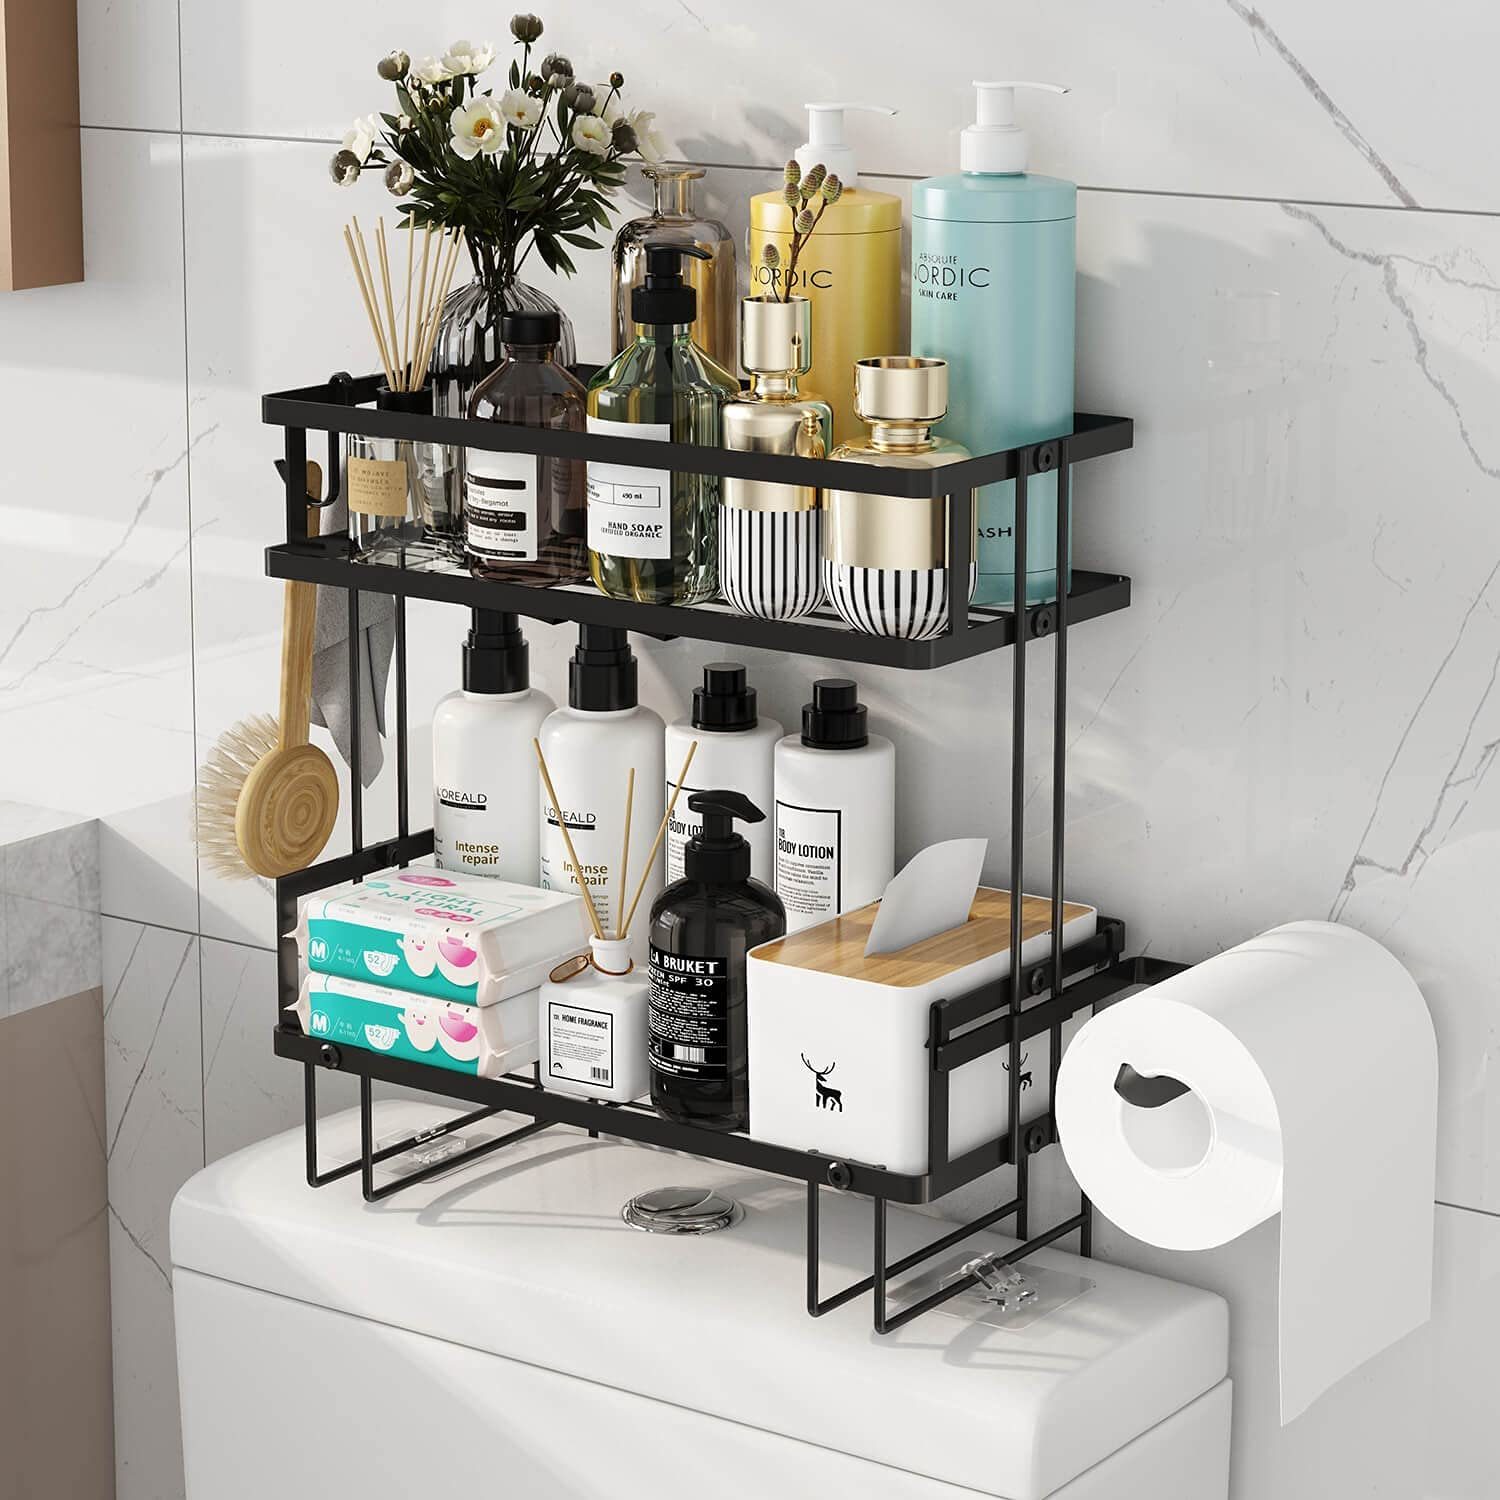 Best Over the Toilet Organizers for Bathroom Storage of 2022